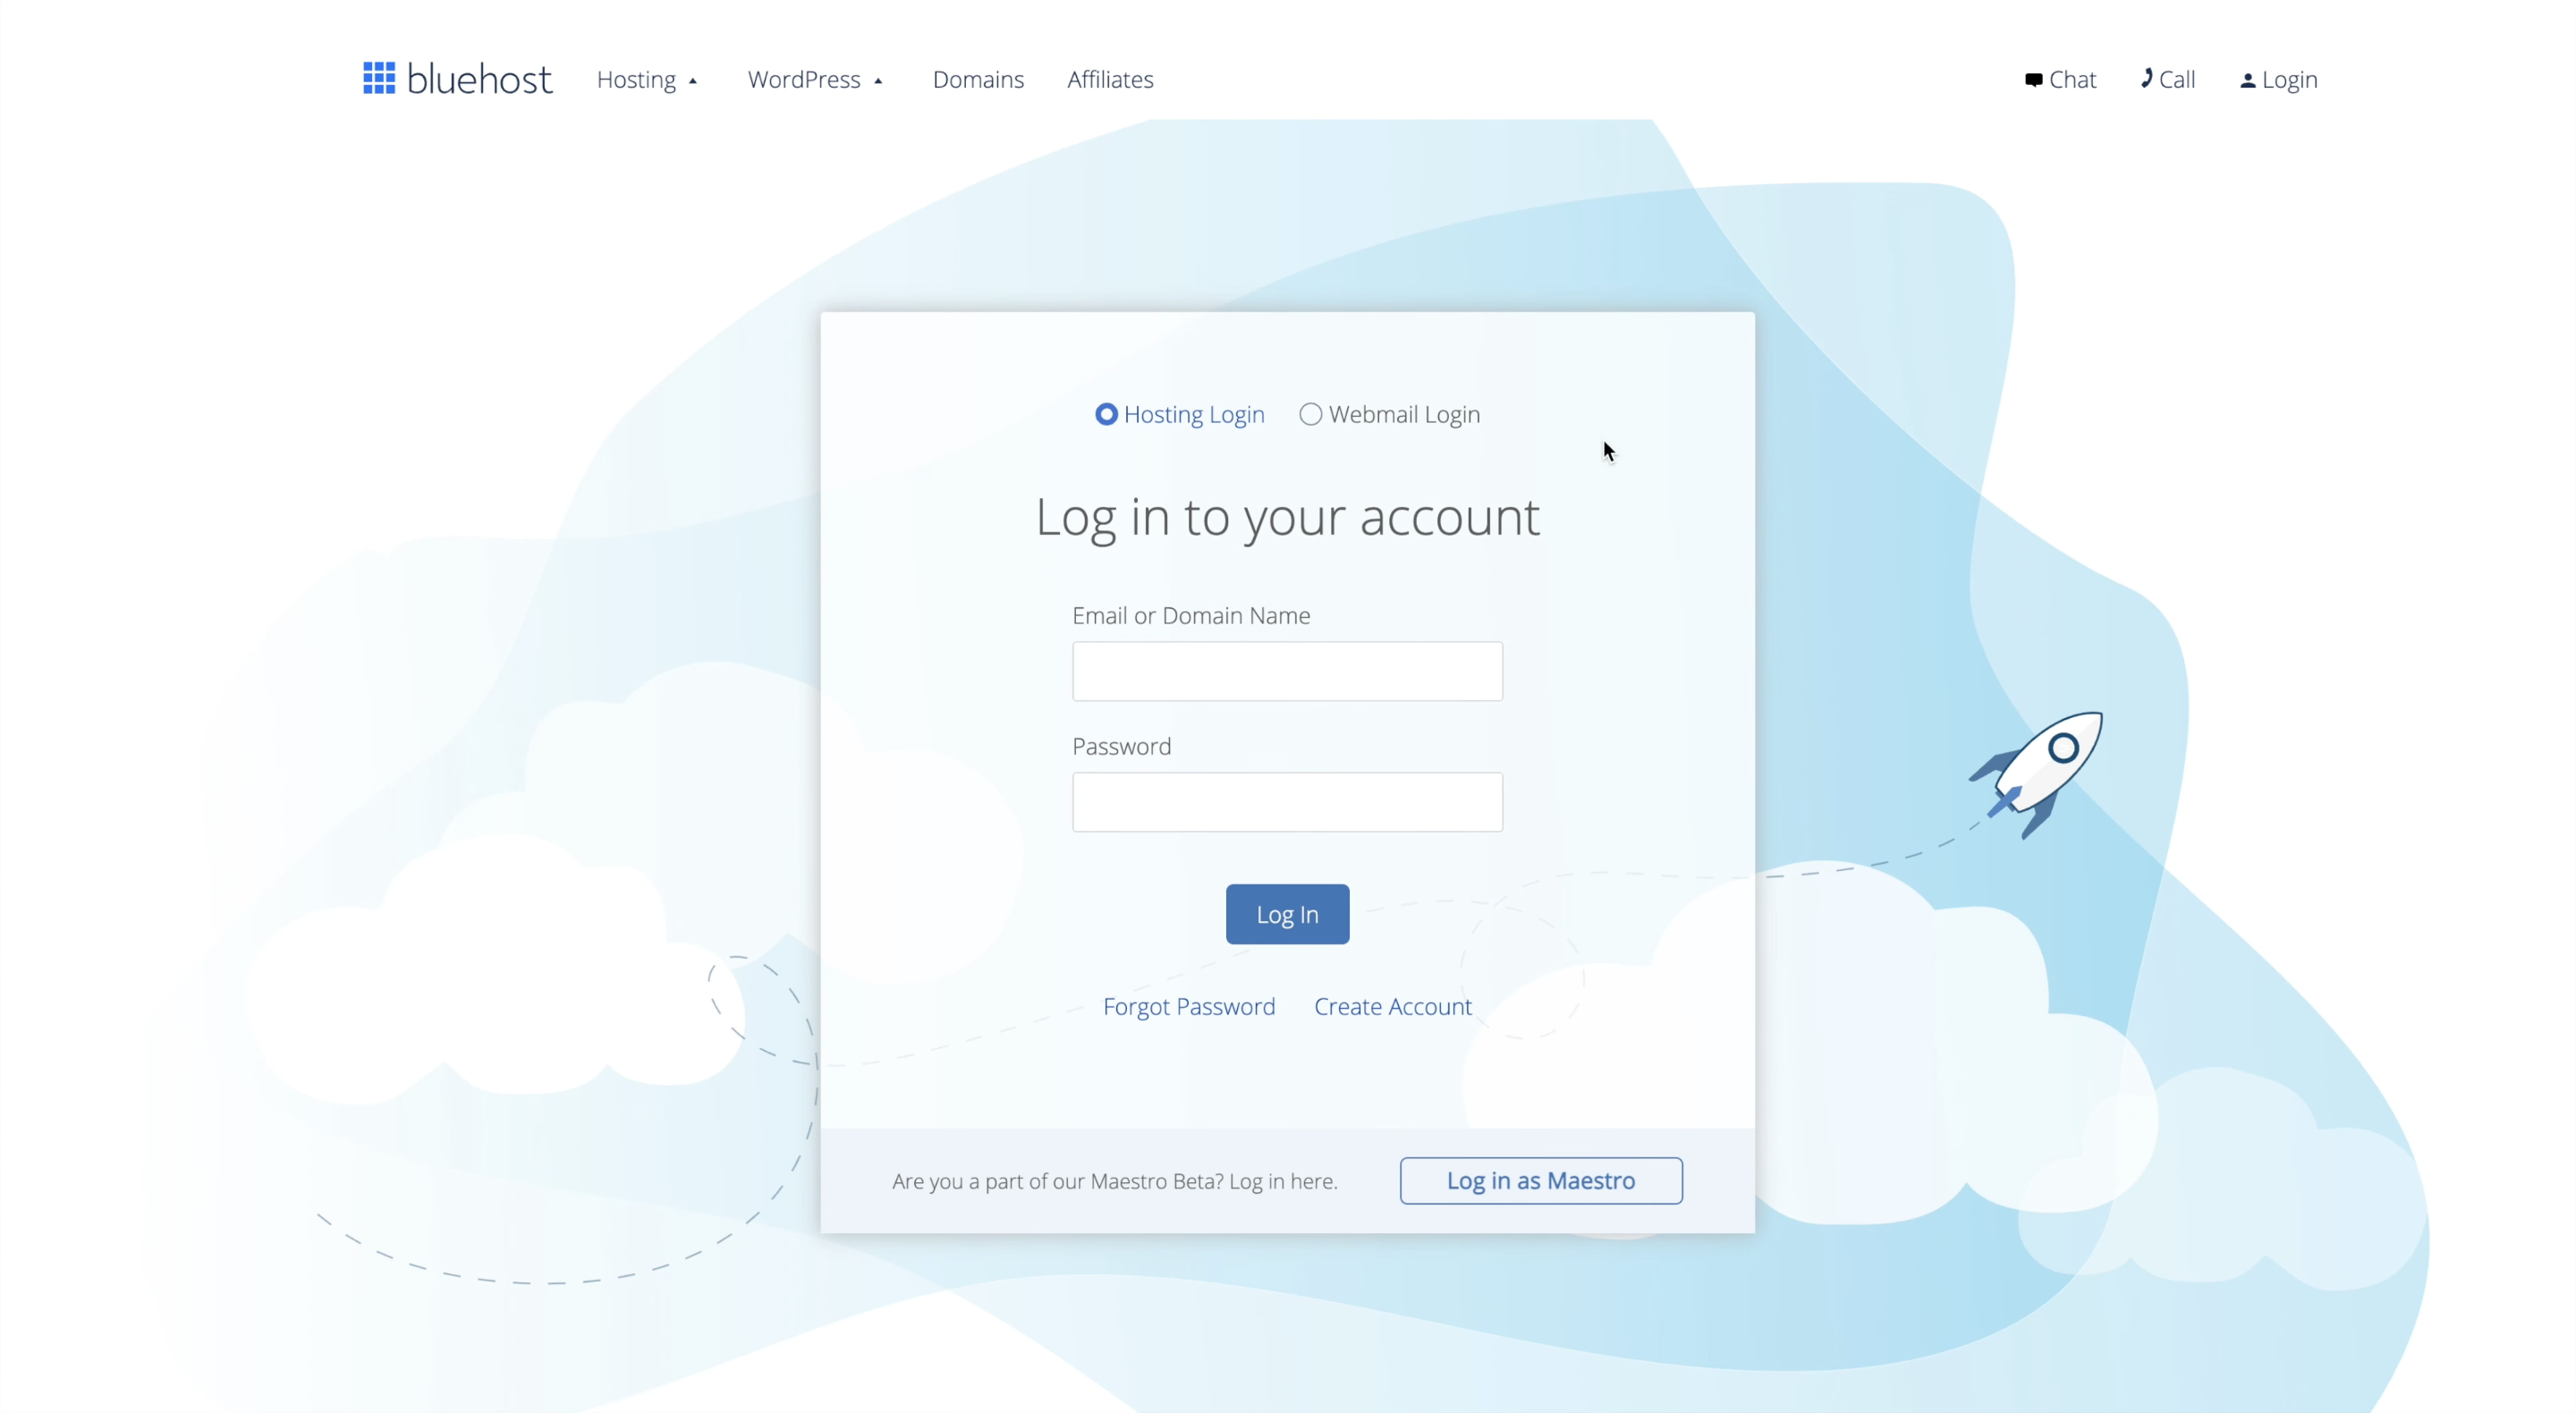 The Log in to your Bluehost account pop-up window is shown